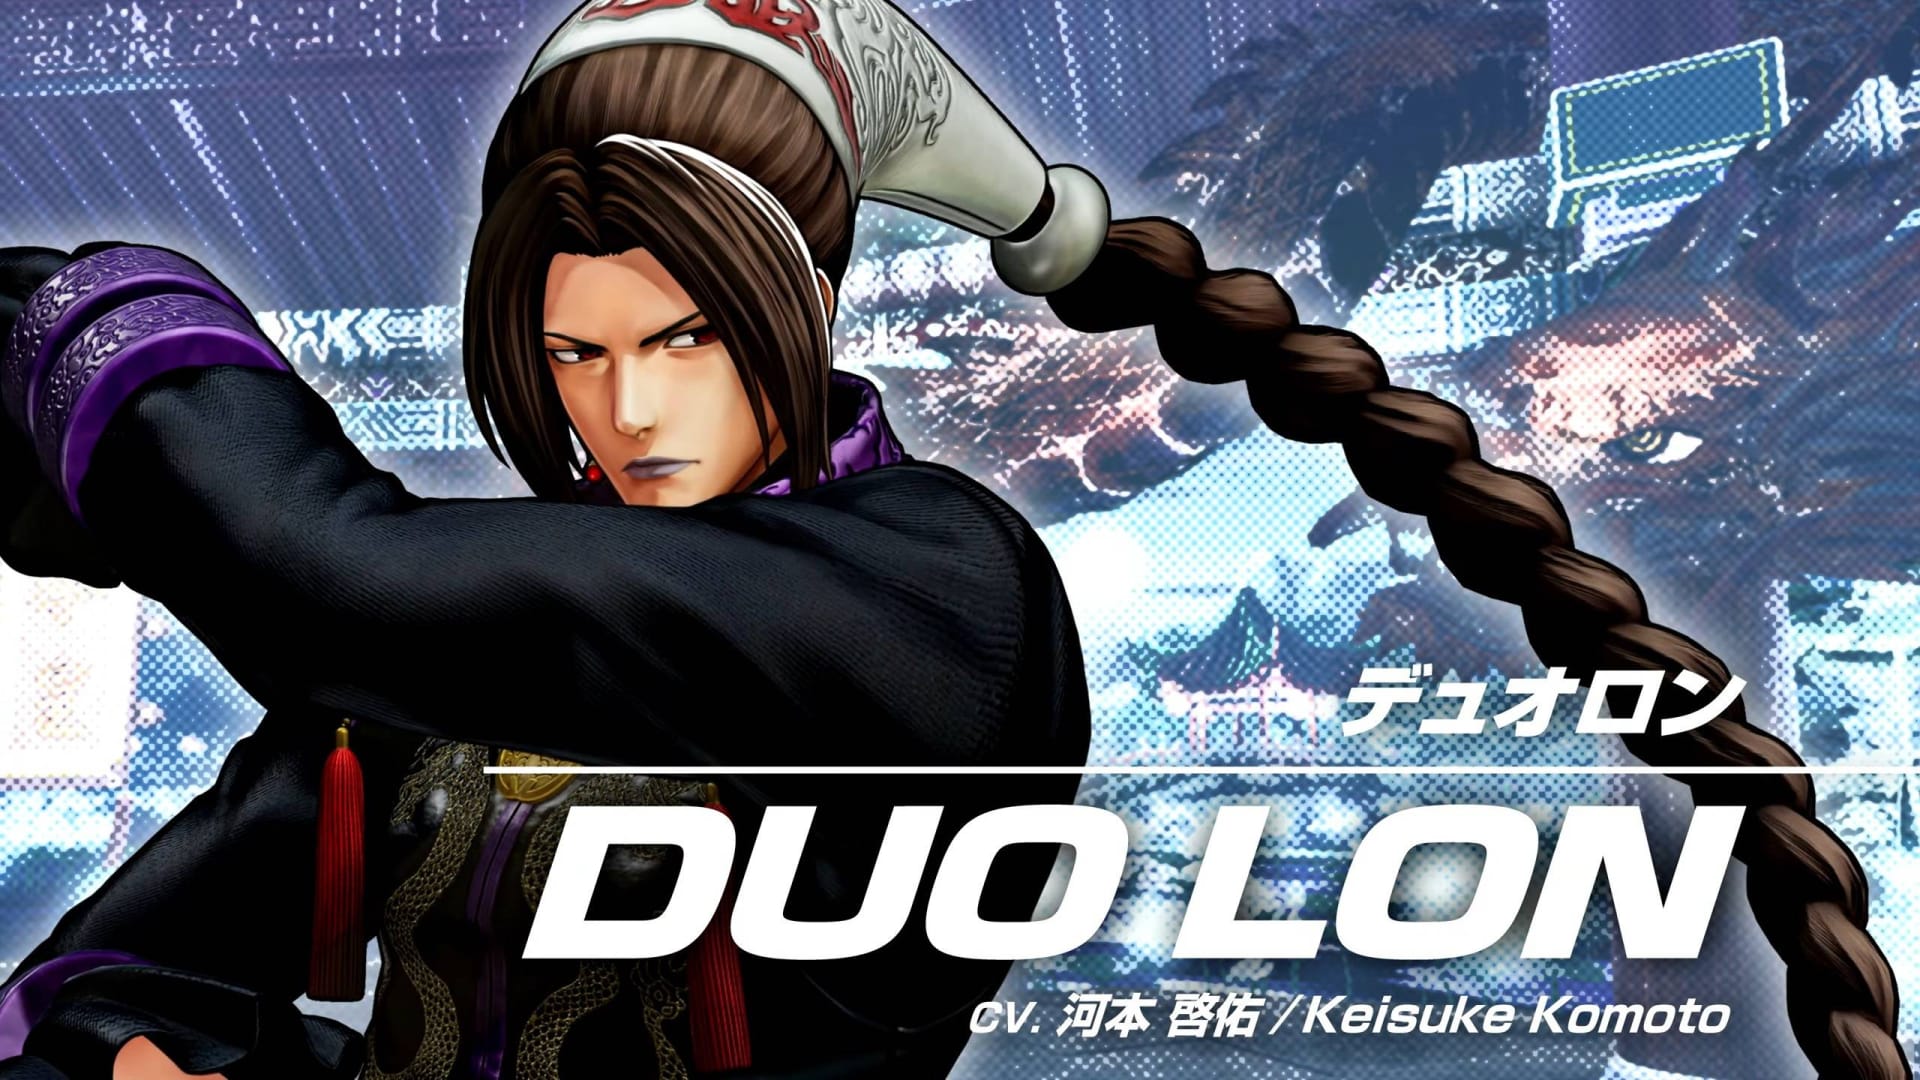 KOF XV Release Date Falls in February 2022, Includes All Past Heroes